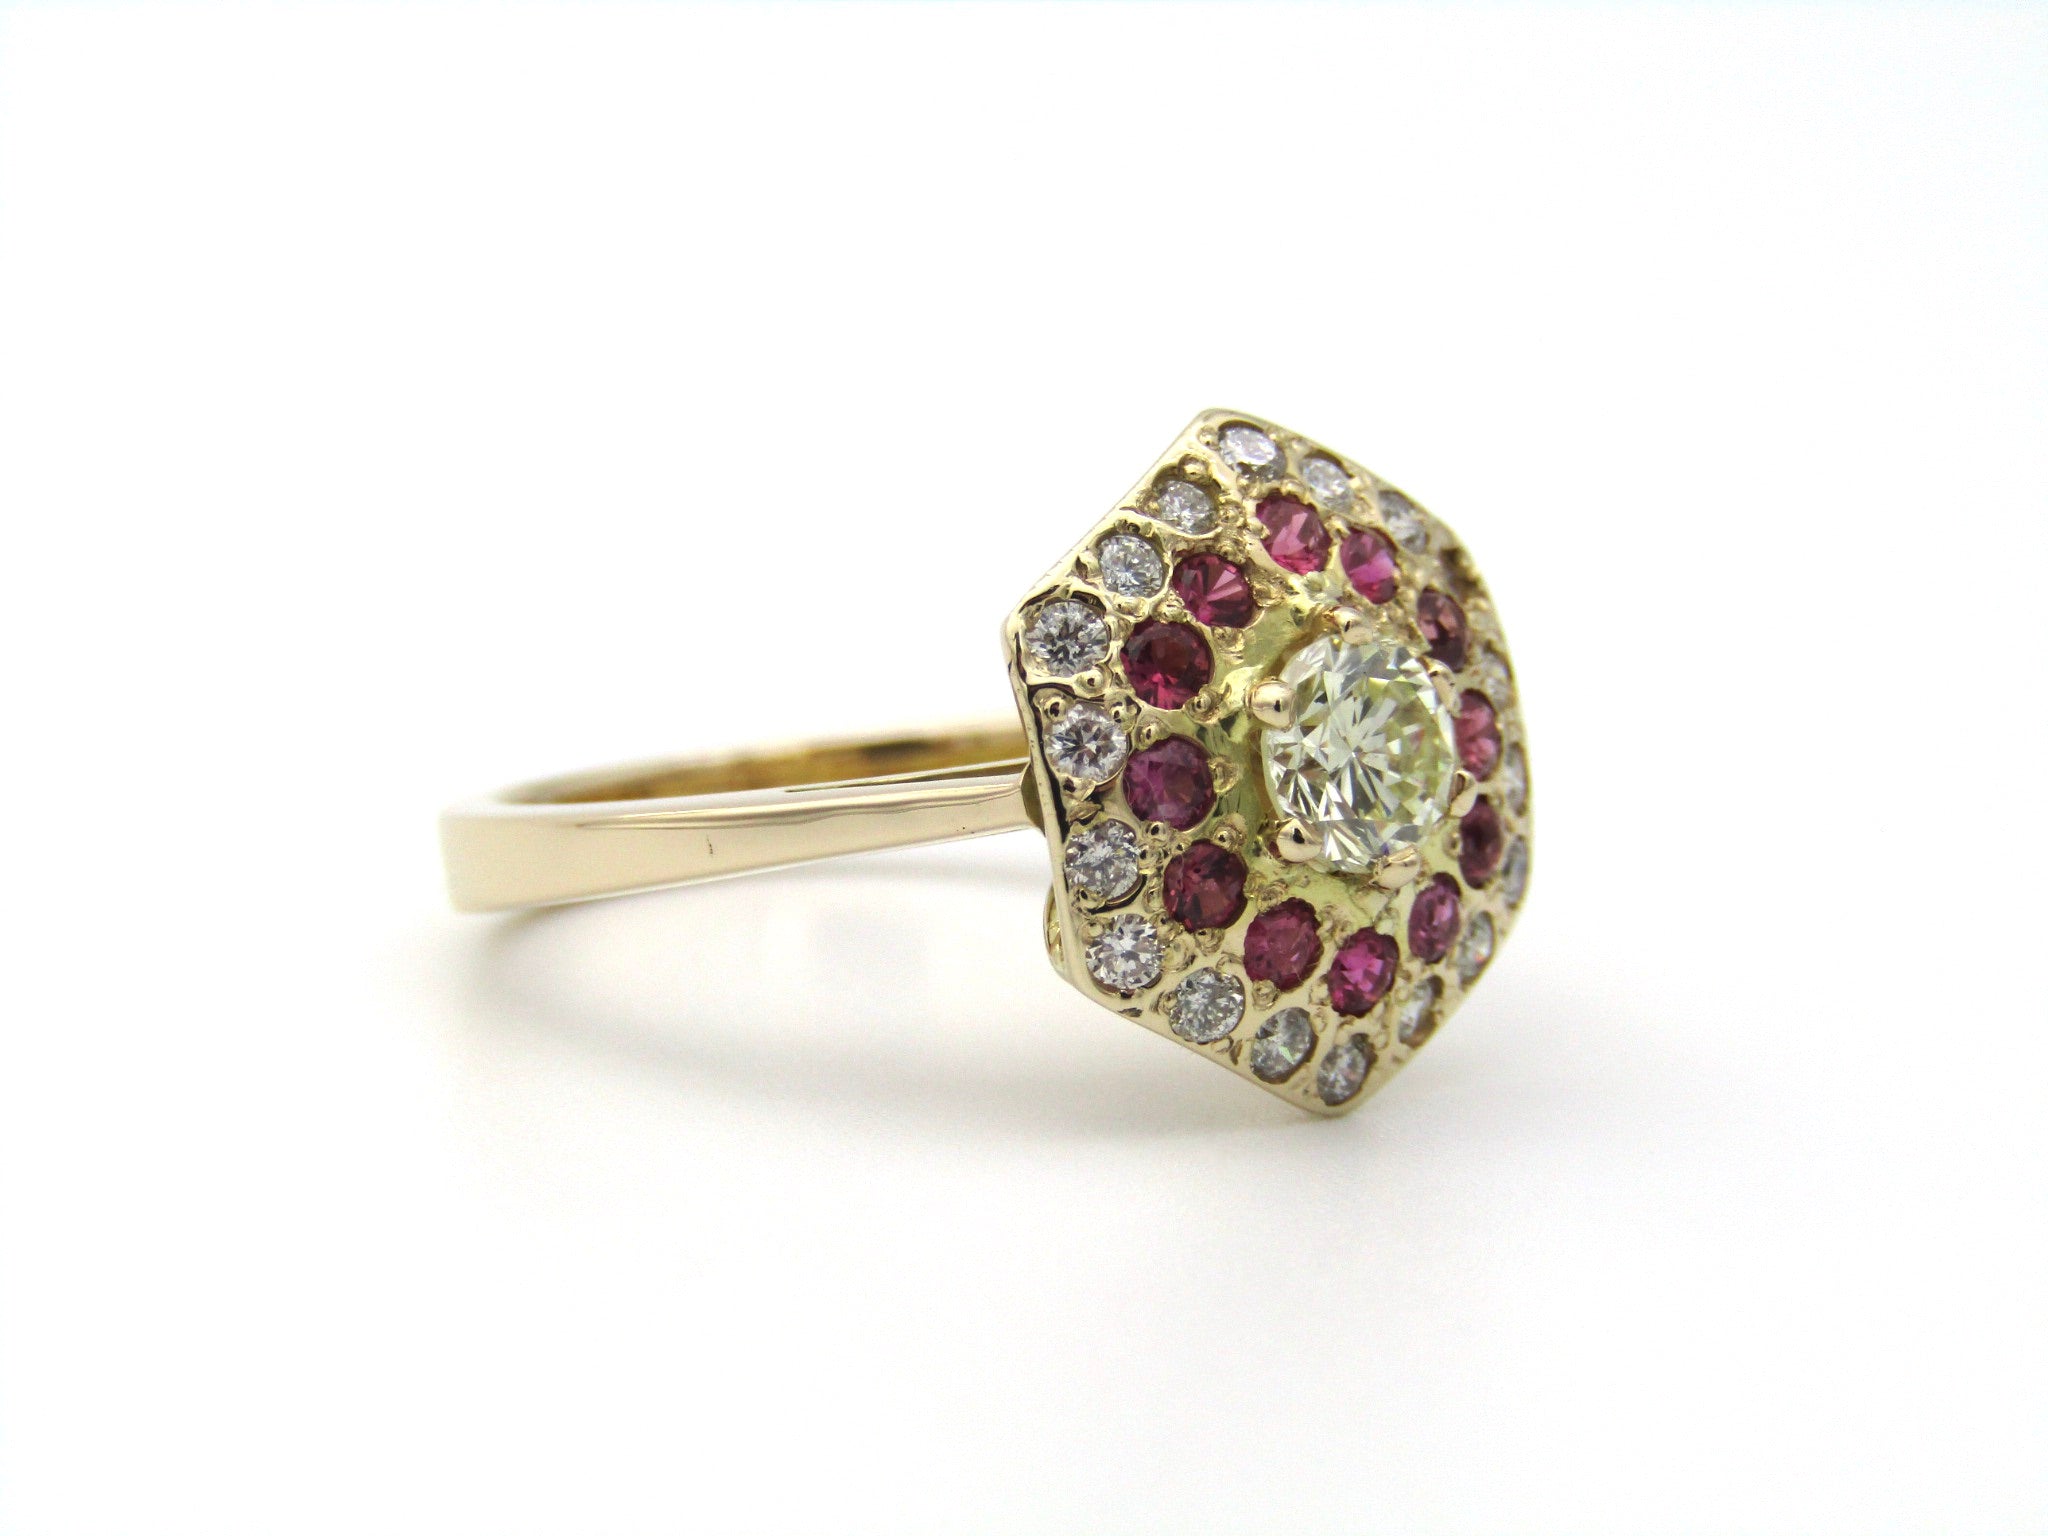 14K gold diamond and ruby ring.